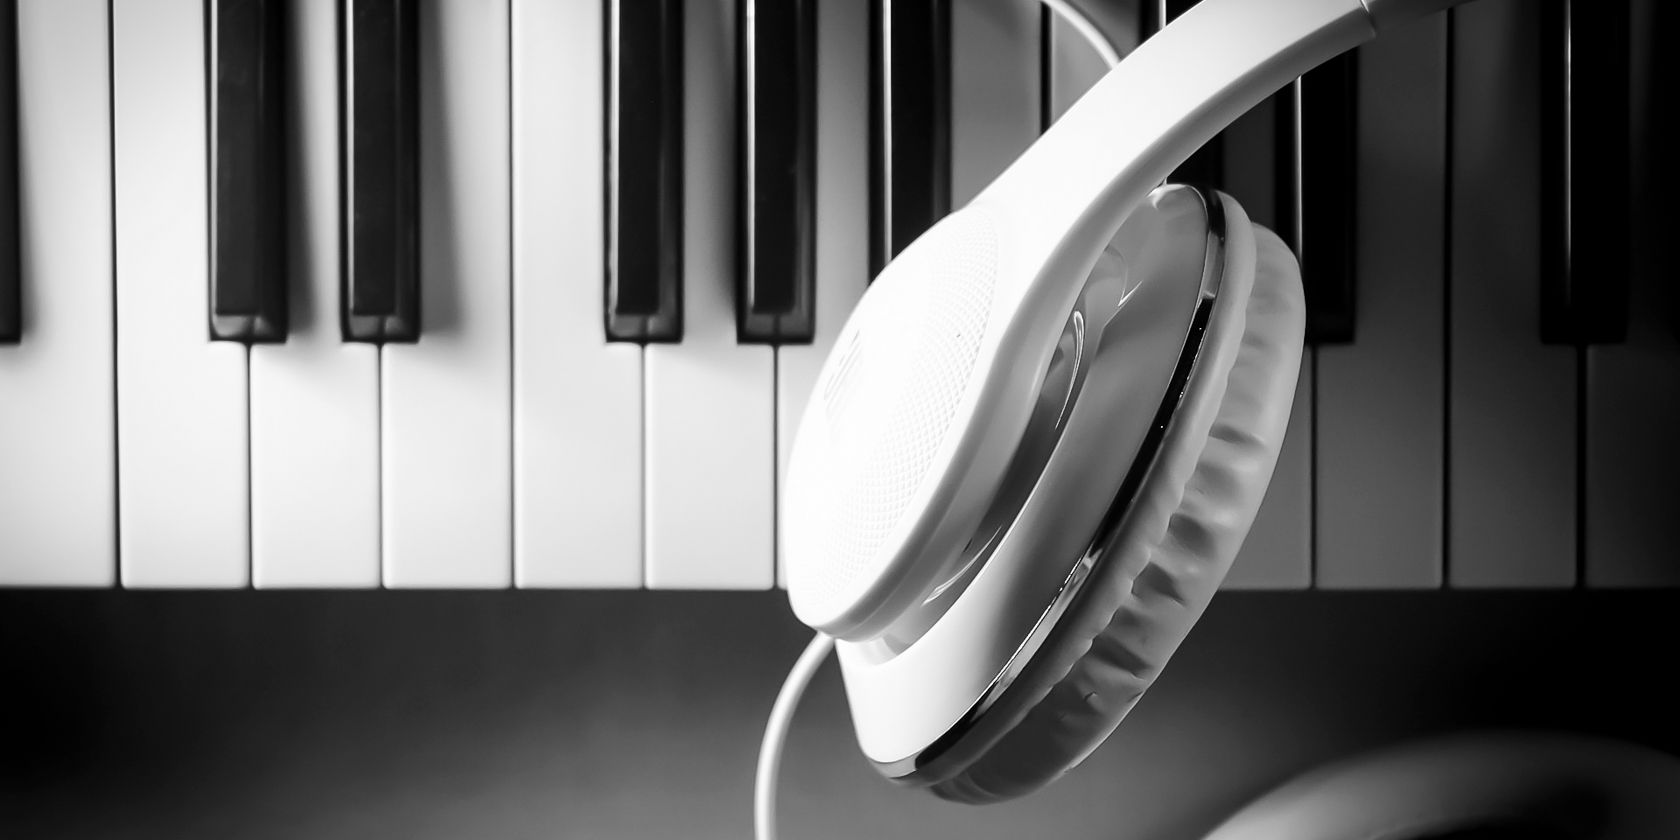 Headphones placed on top of a piano keyboard